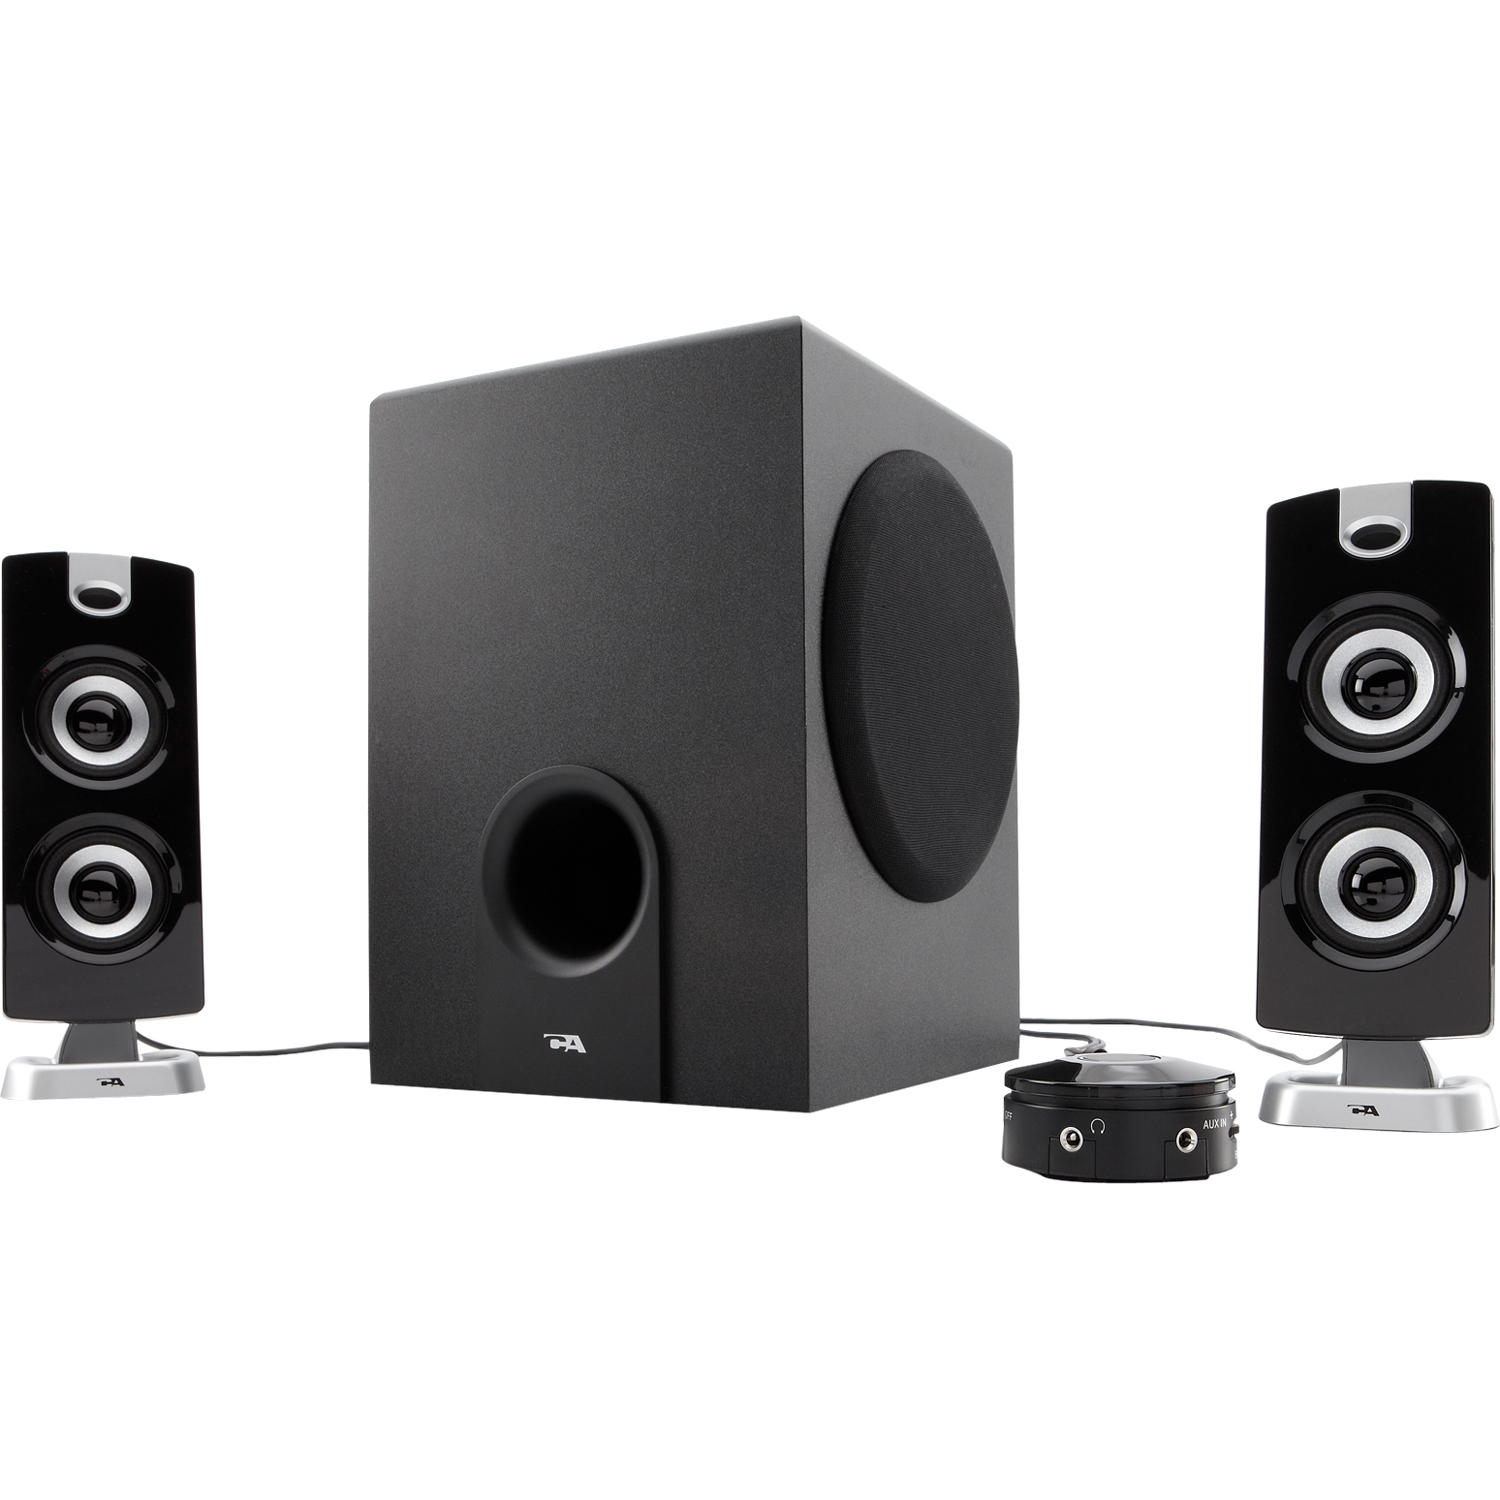 Cyber Acoustics CA-3602 Platinum Speaker System - 2.1-channel - 30W (RMS) / 62W (PMPO) - image 3 of 4